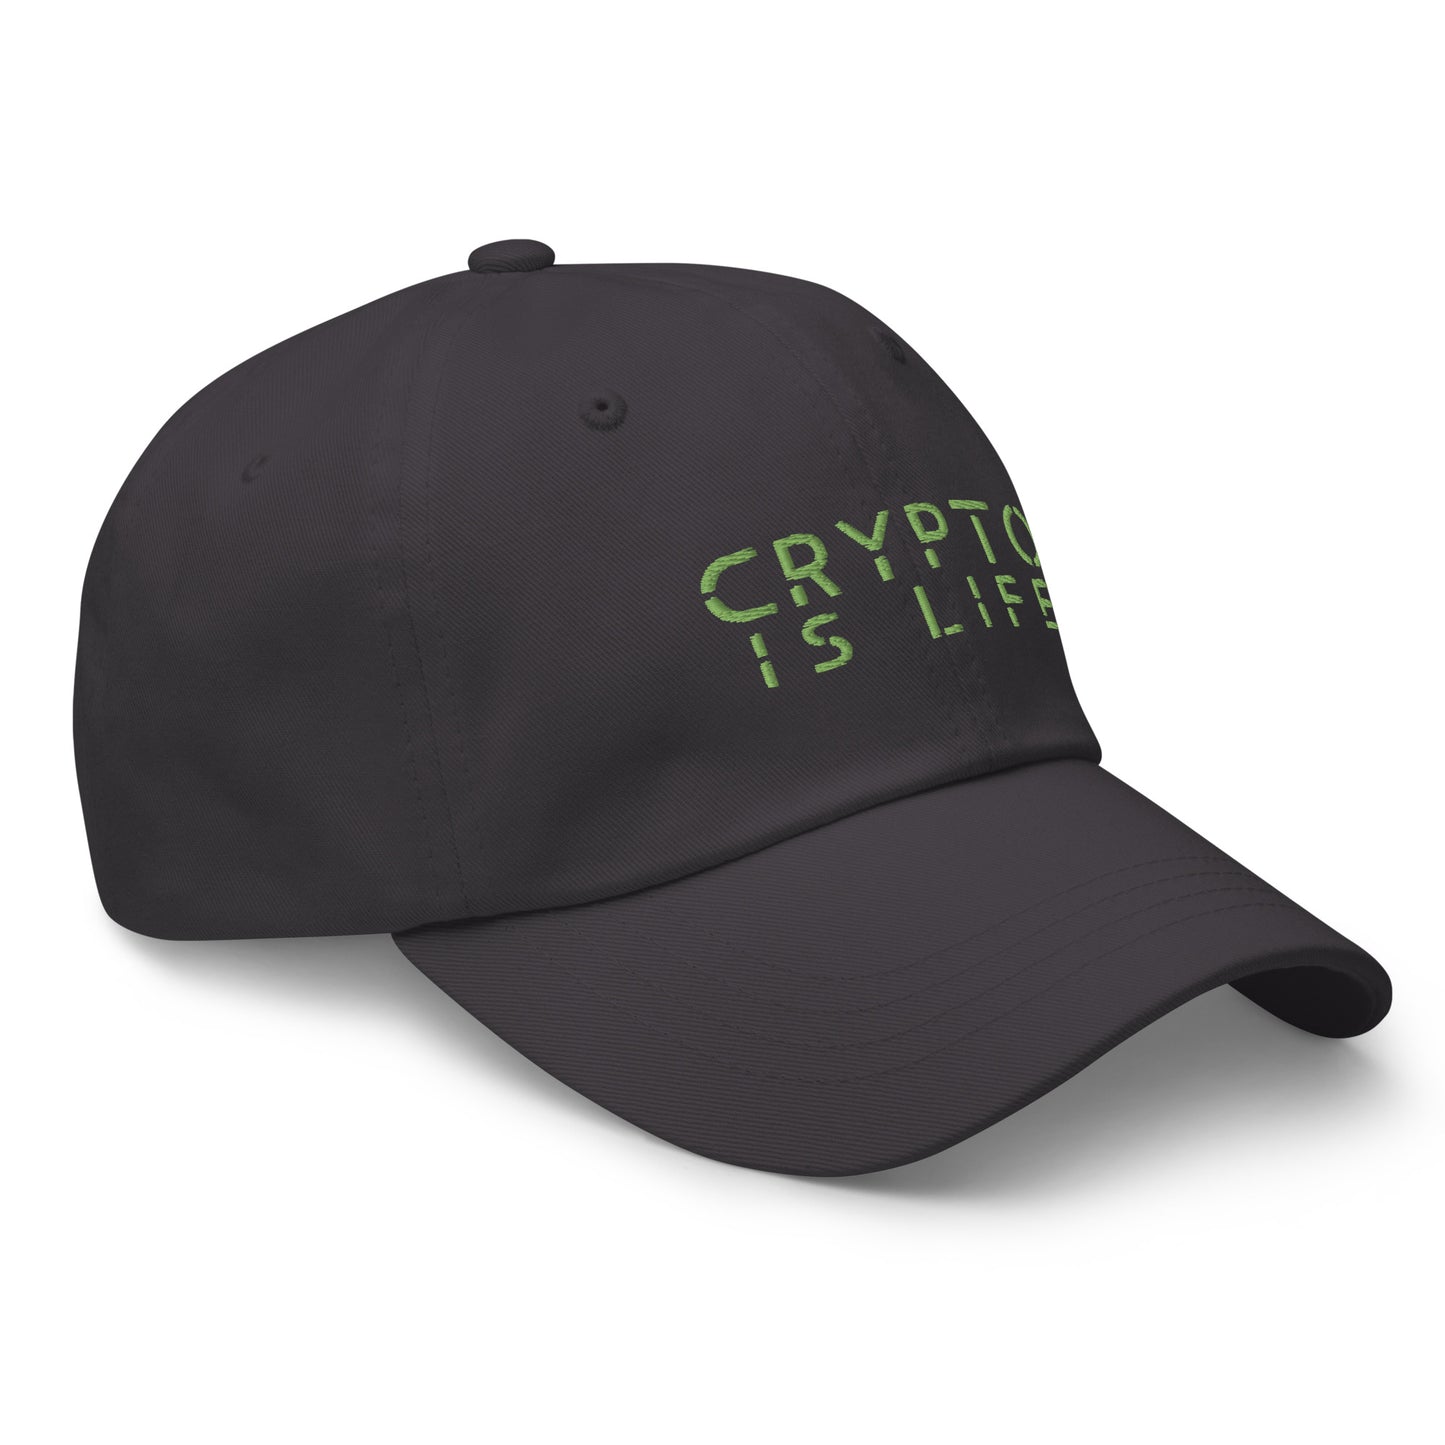 CRYPTO IS LIFE Comfort Basecap